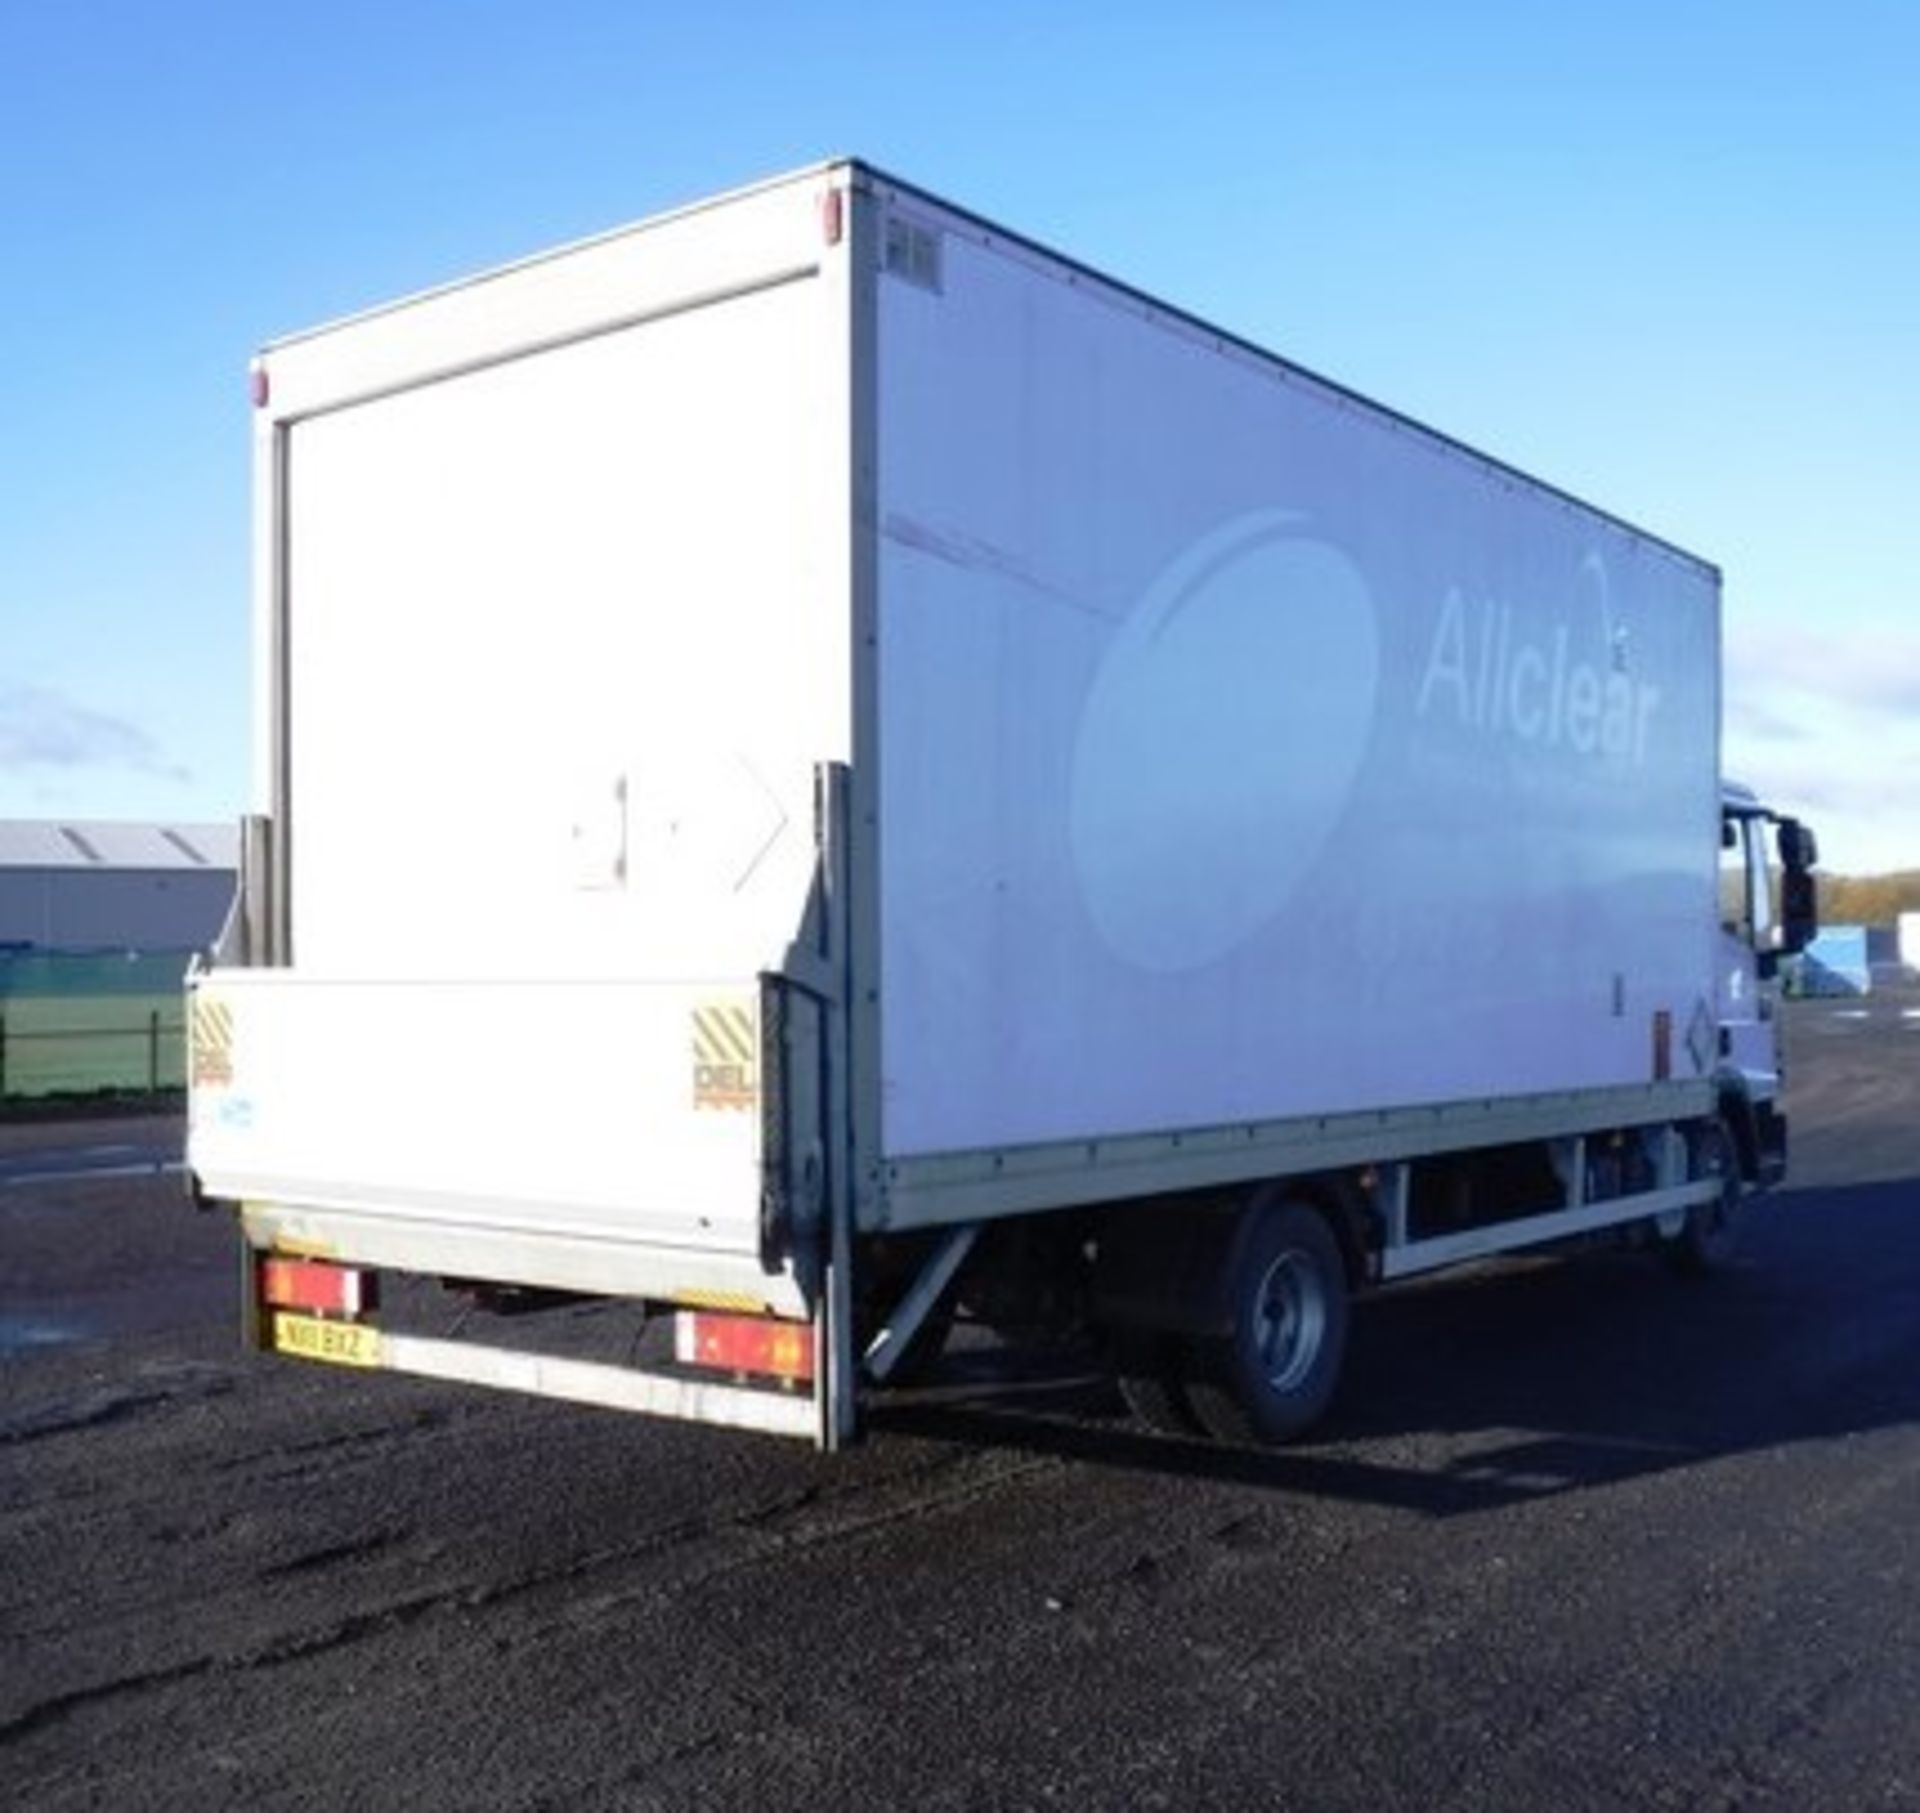 IVECO MODEL EUROCARGO (MY 2008) - 3920cc - Image 20 of 24